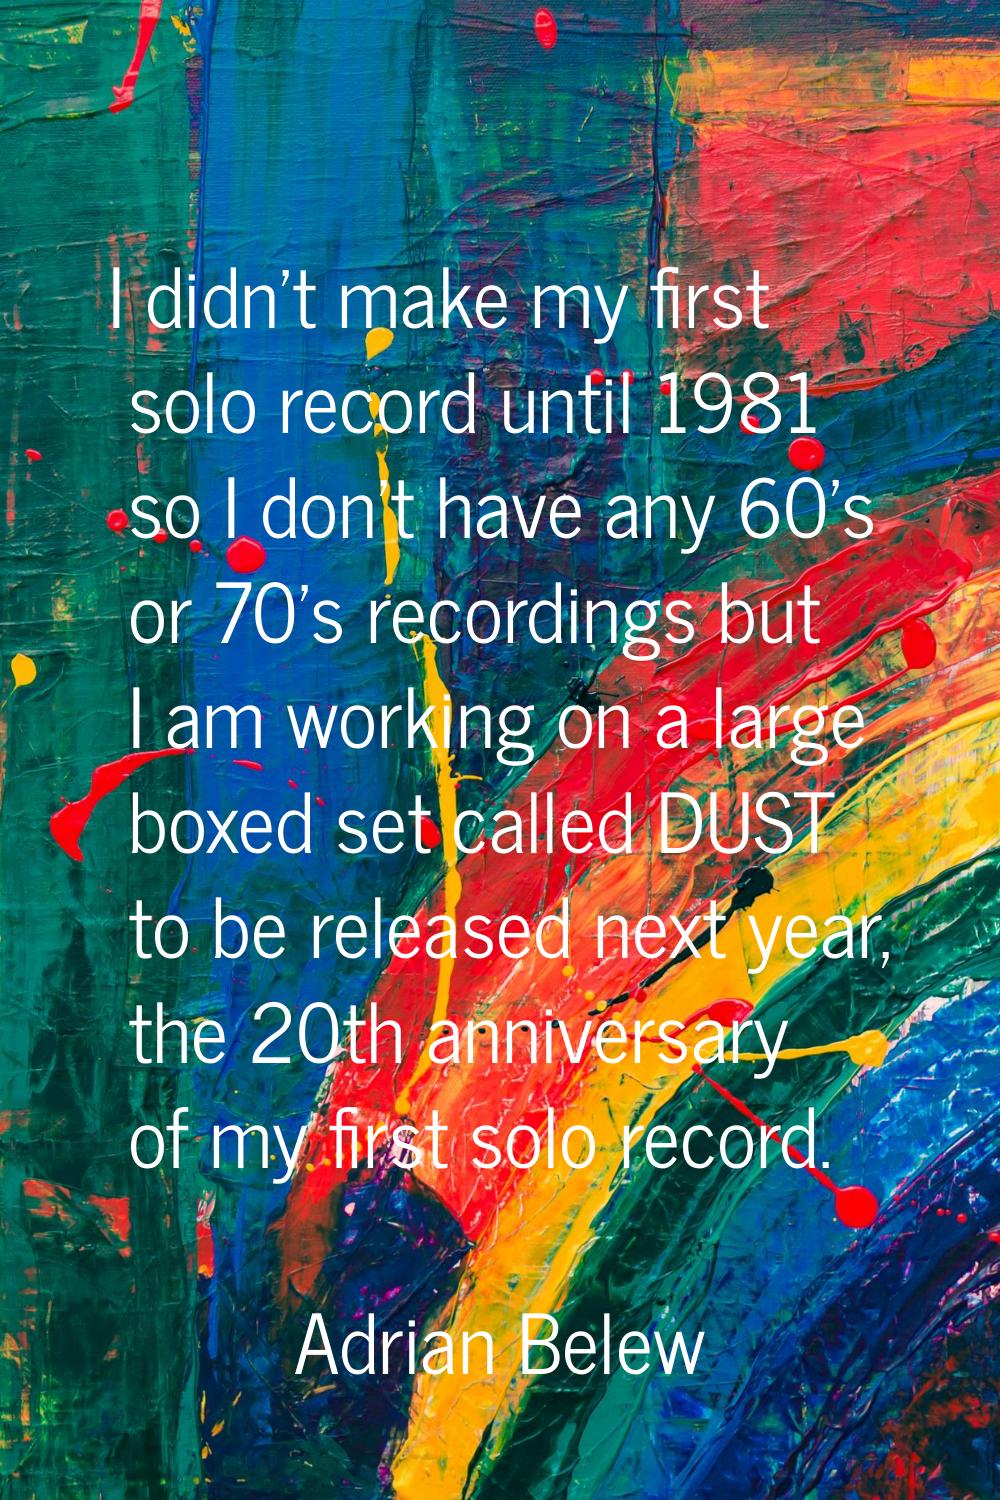 I didn't make my first solo record until 1981 so I don't have any 60's or 70's recordings but I am 